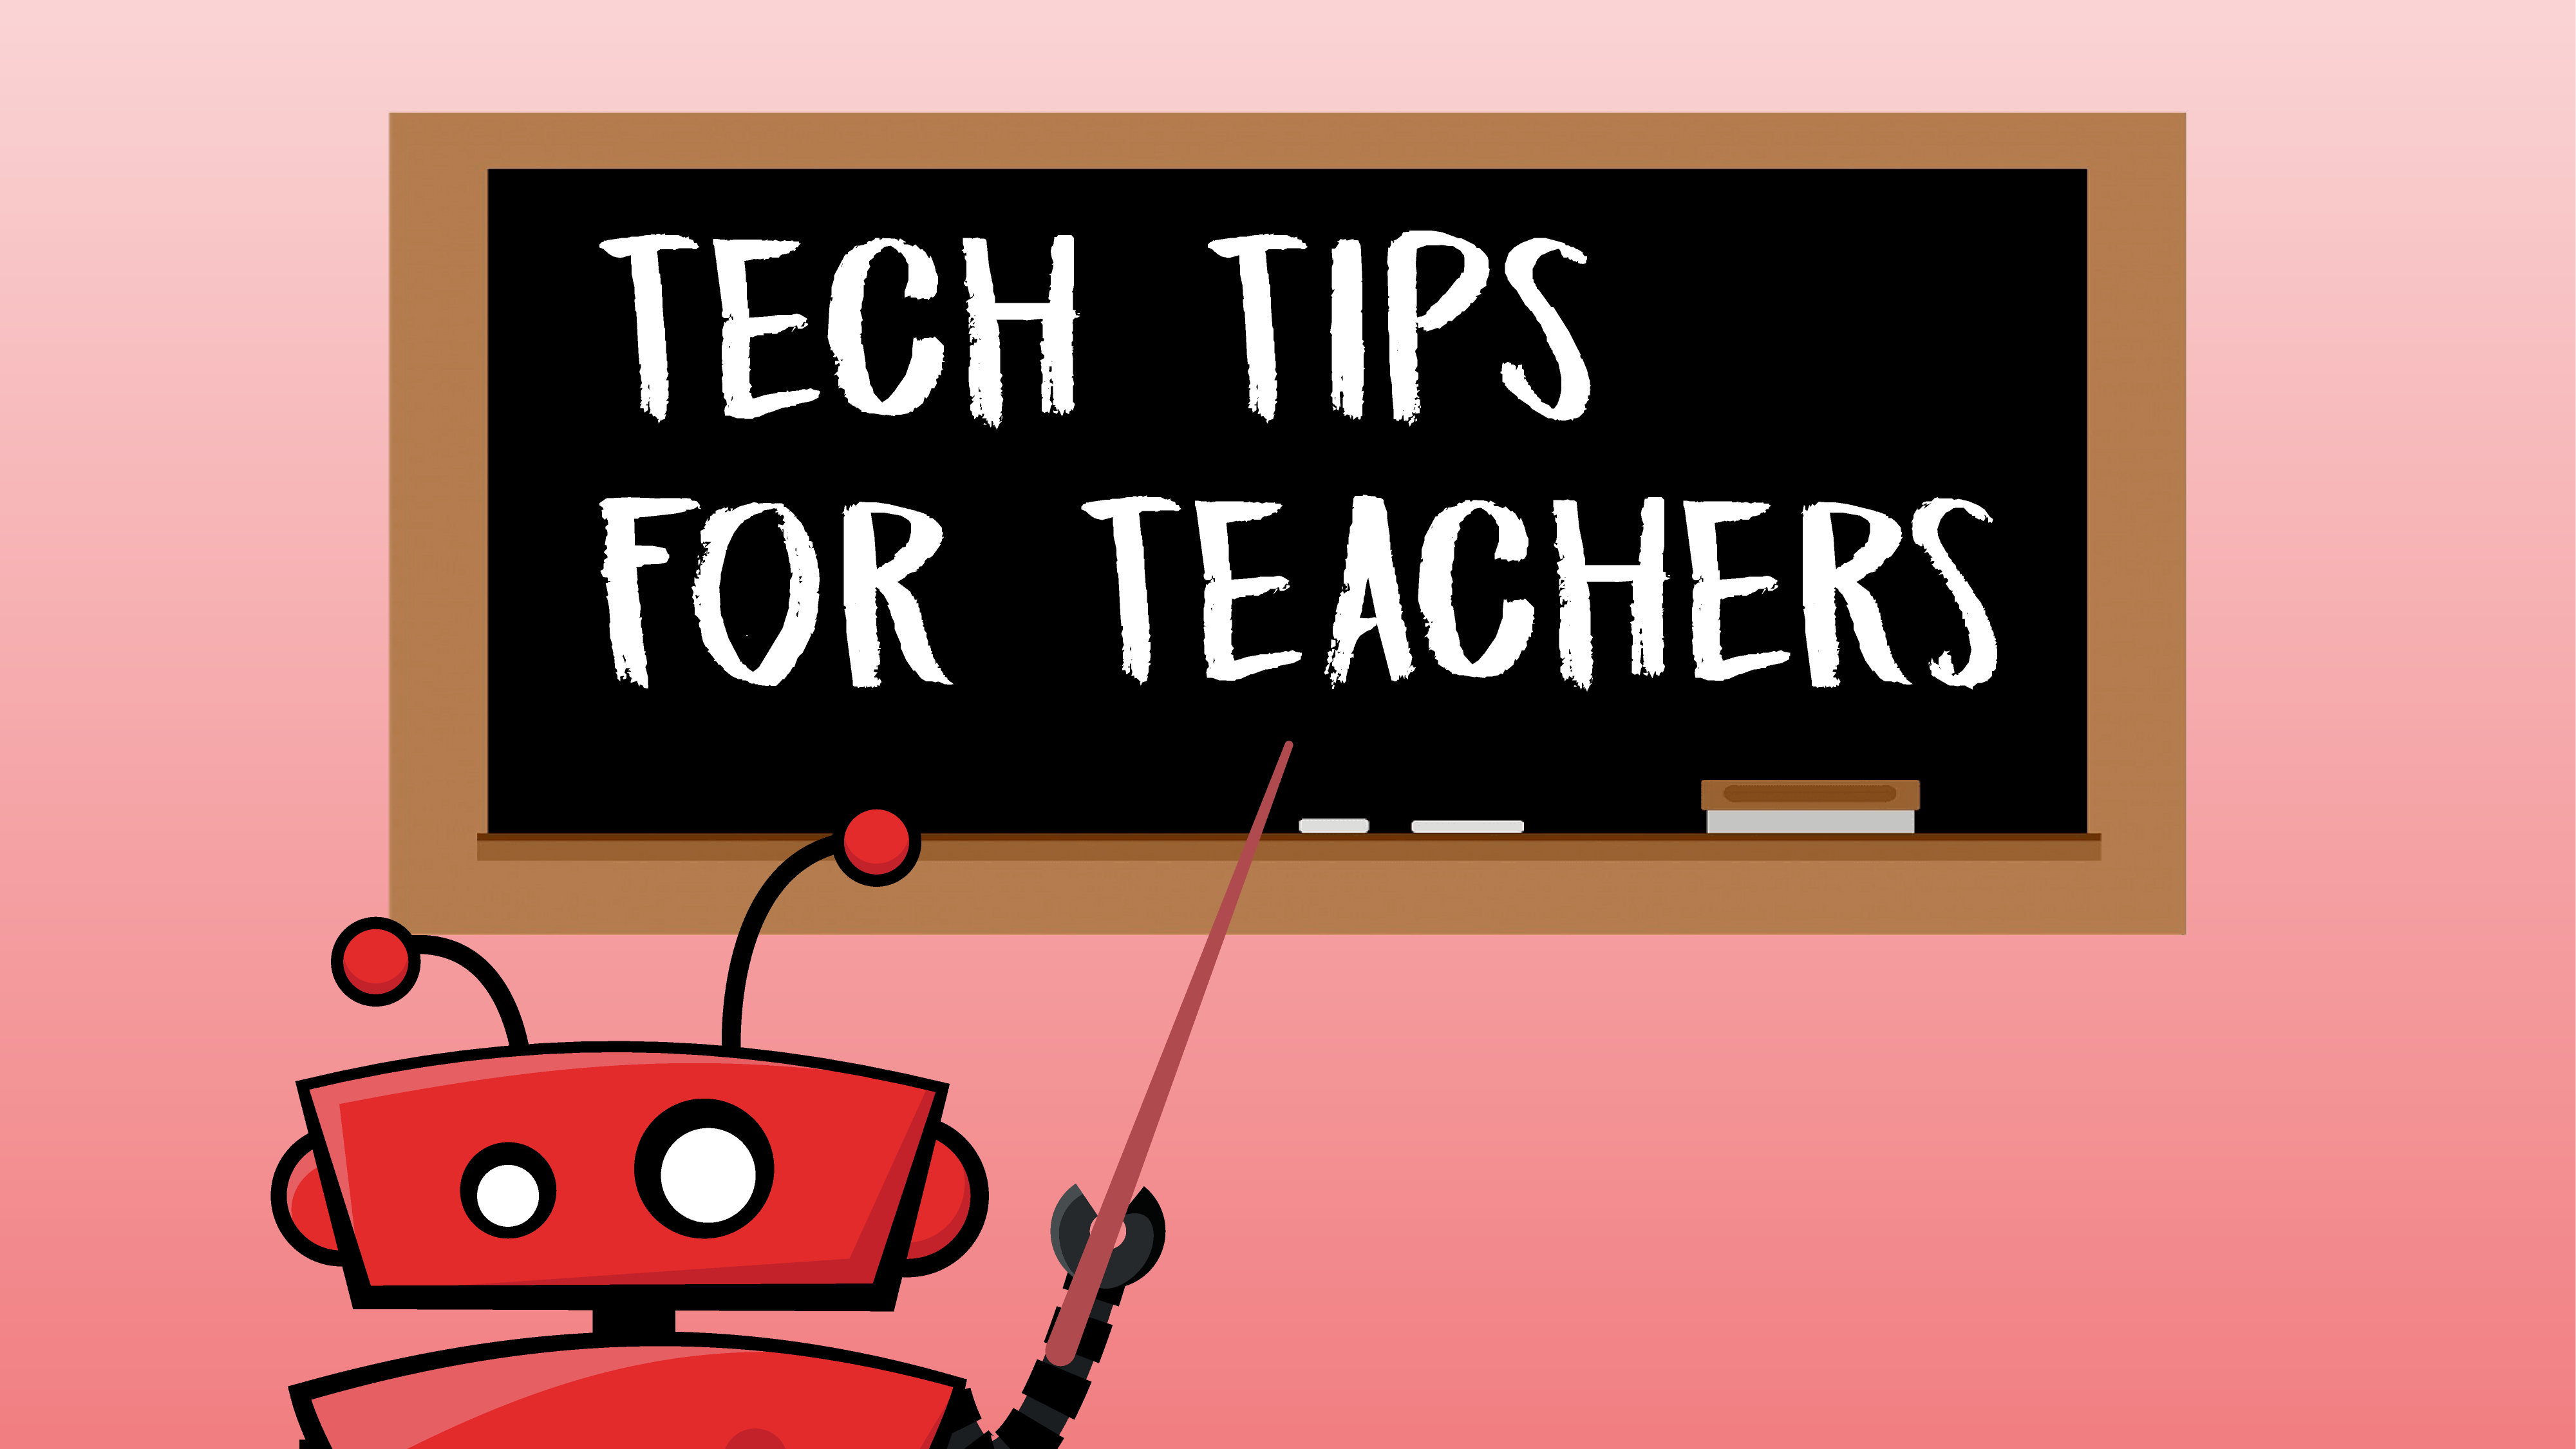 tech tips for teachers graphic with xbert